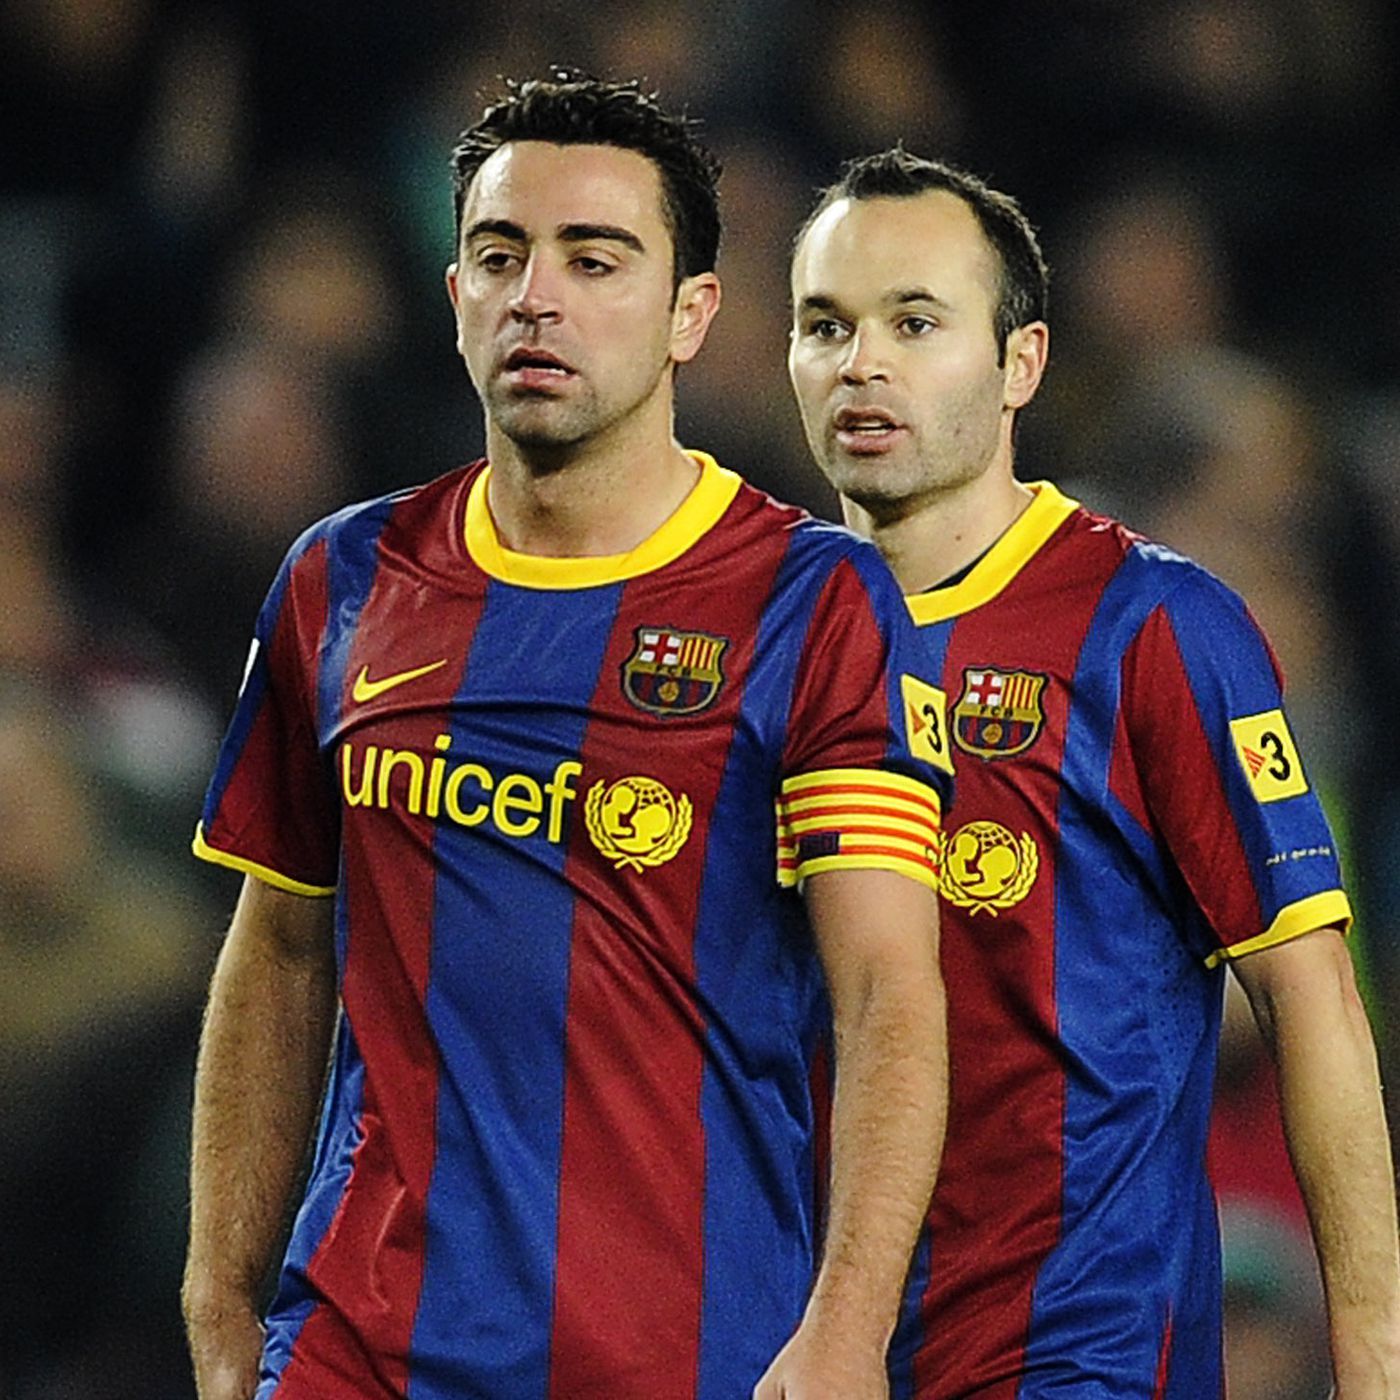 Xavi and Iniesta are not playing together anymore - Why?